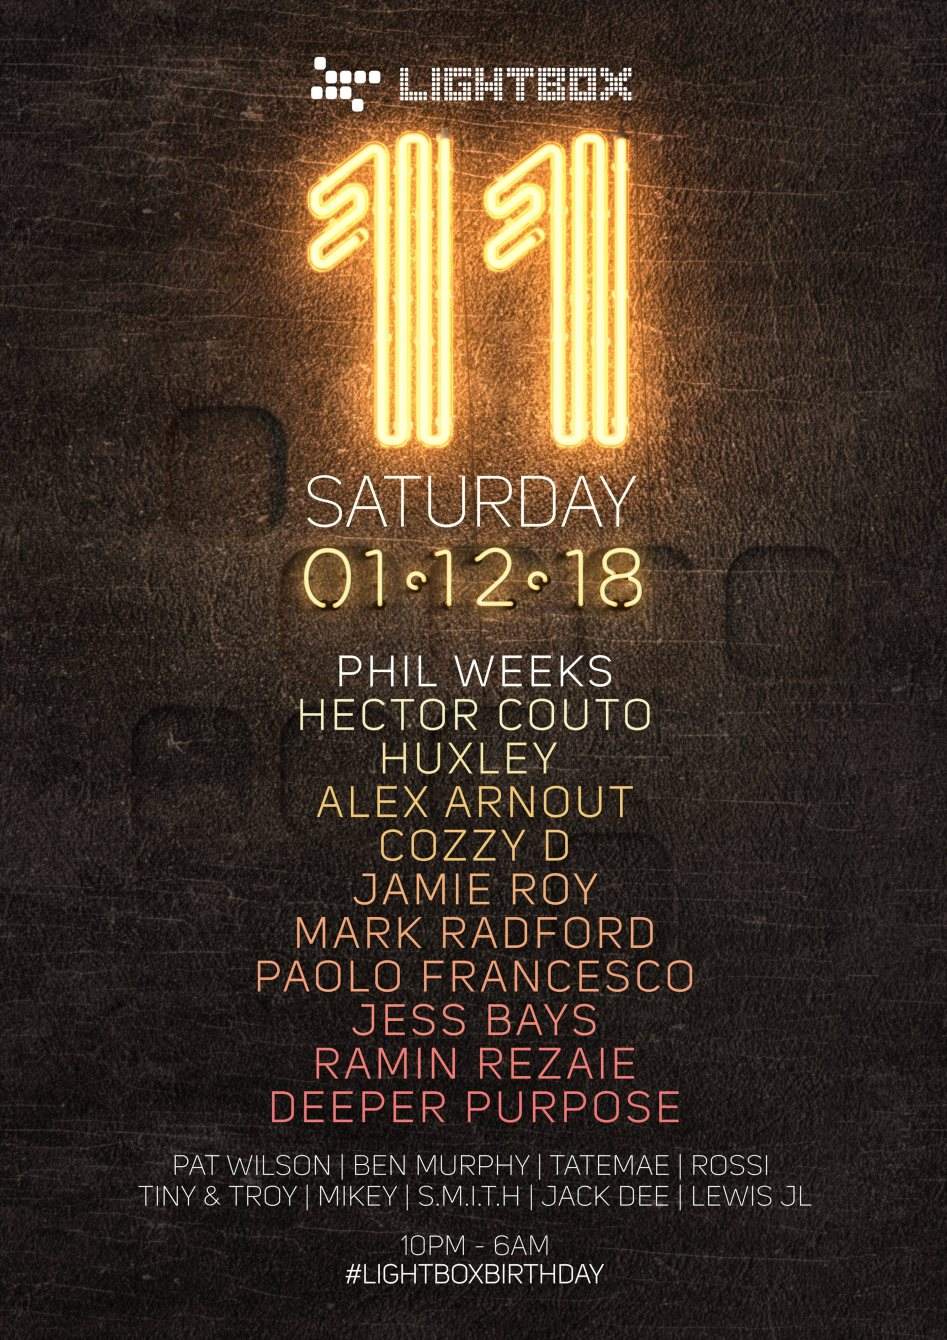 Lightbox 11th Birthday with Phil Weeks, Hector Couto, Huxley & More - Página trasera